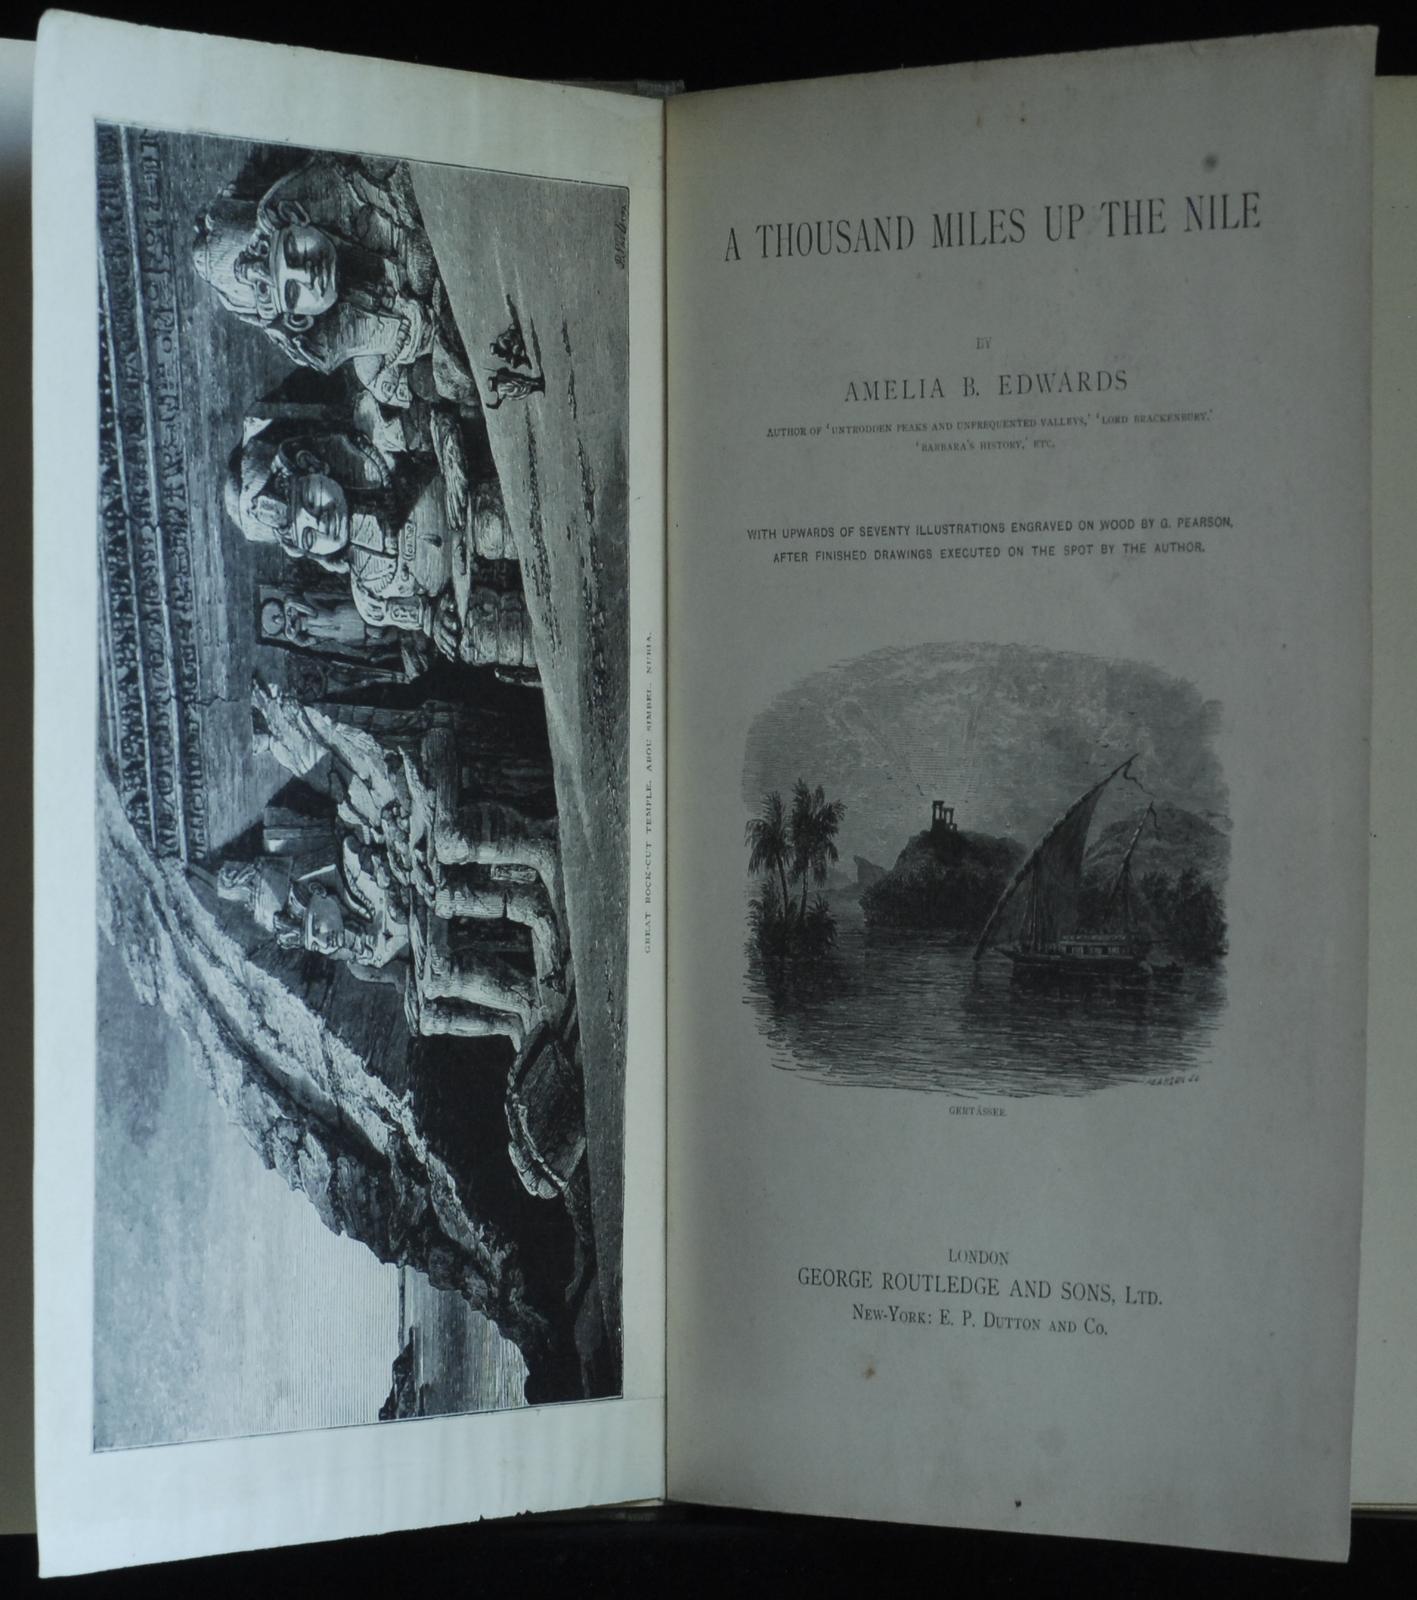 mbb007016e_-_Edwards_Amelia_Blanford_-_A_Thousand_Miles_Up_The_Nile_-_Contains_Illustrations.jpg